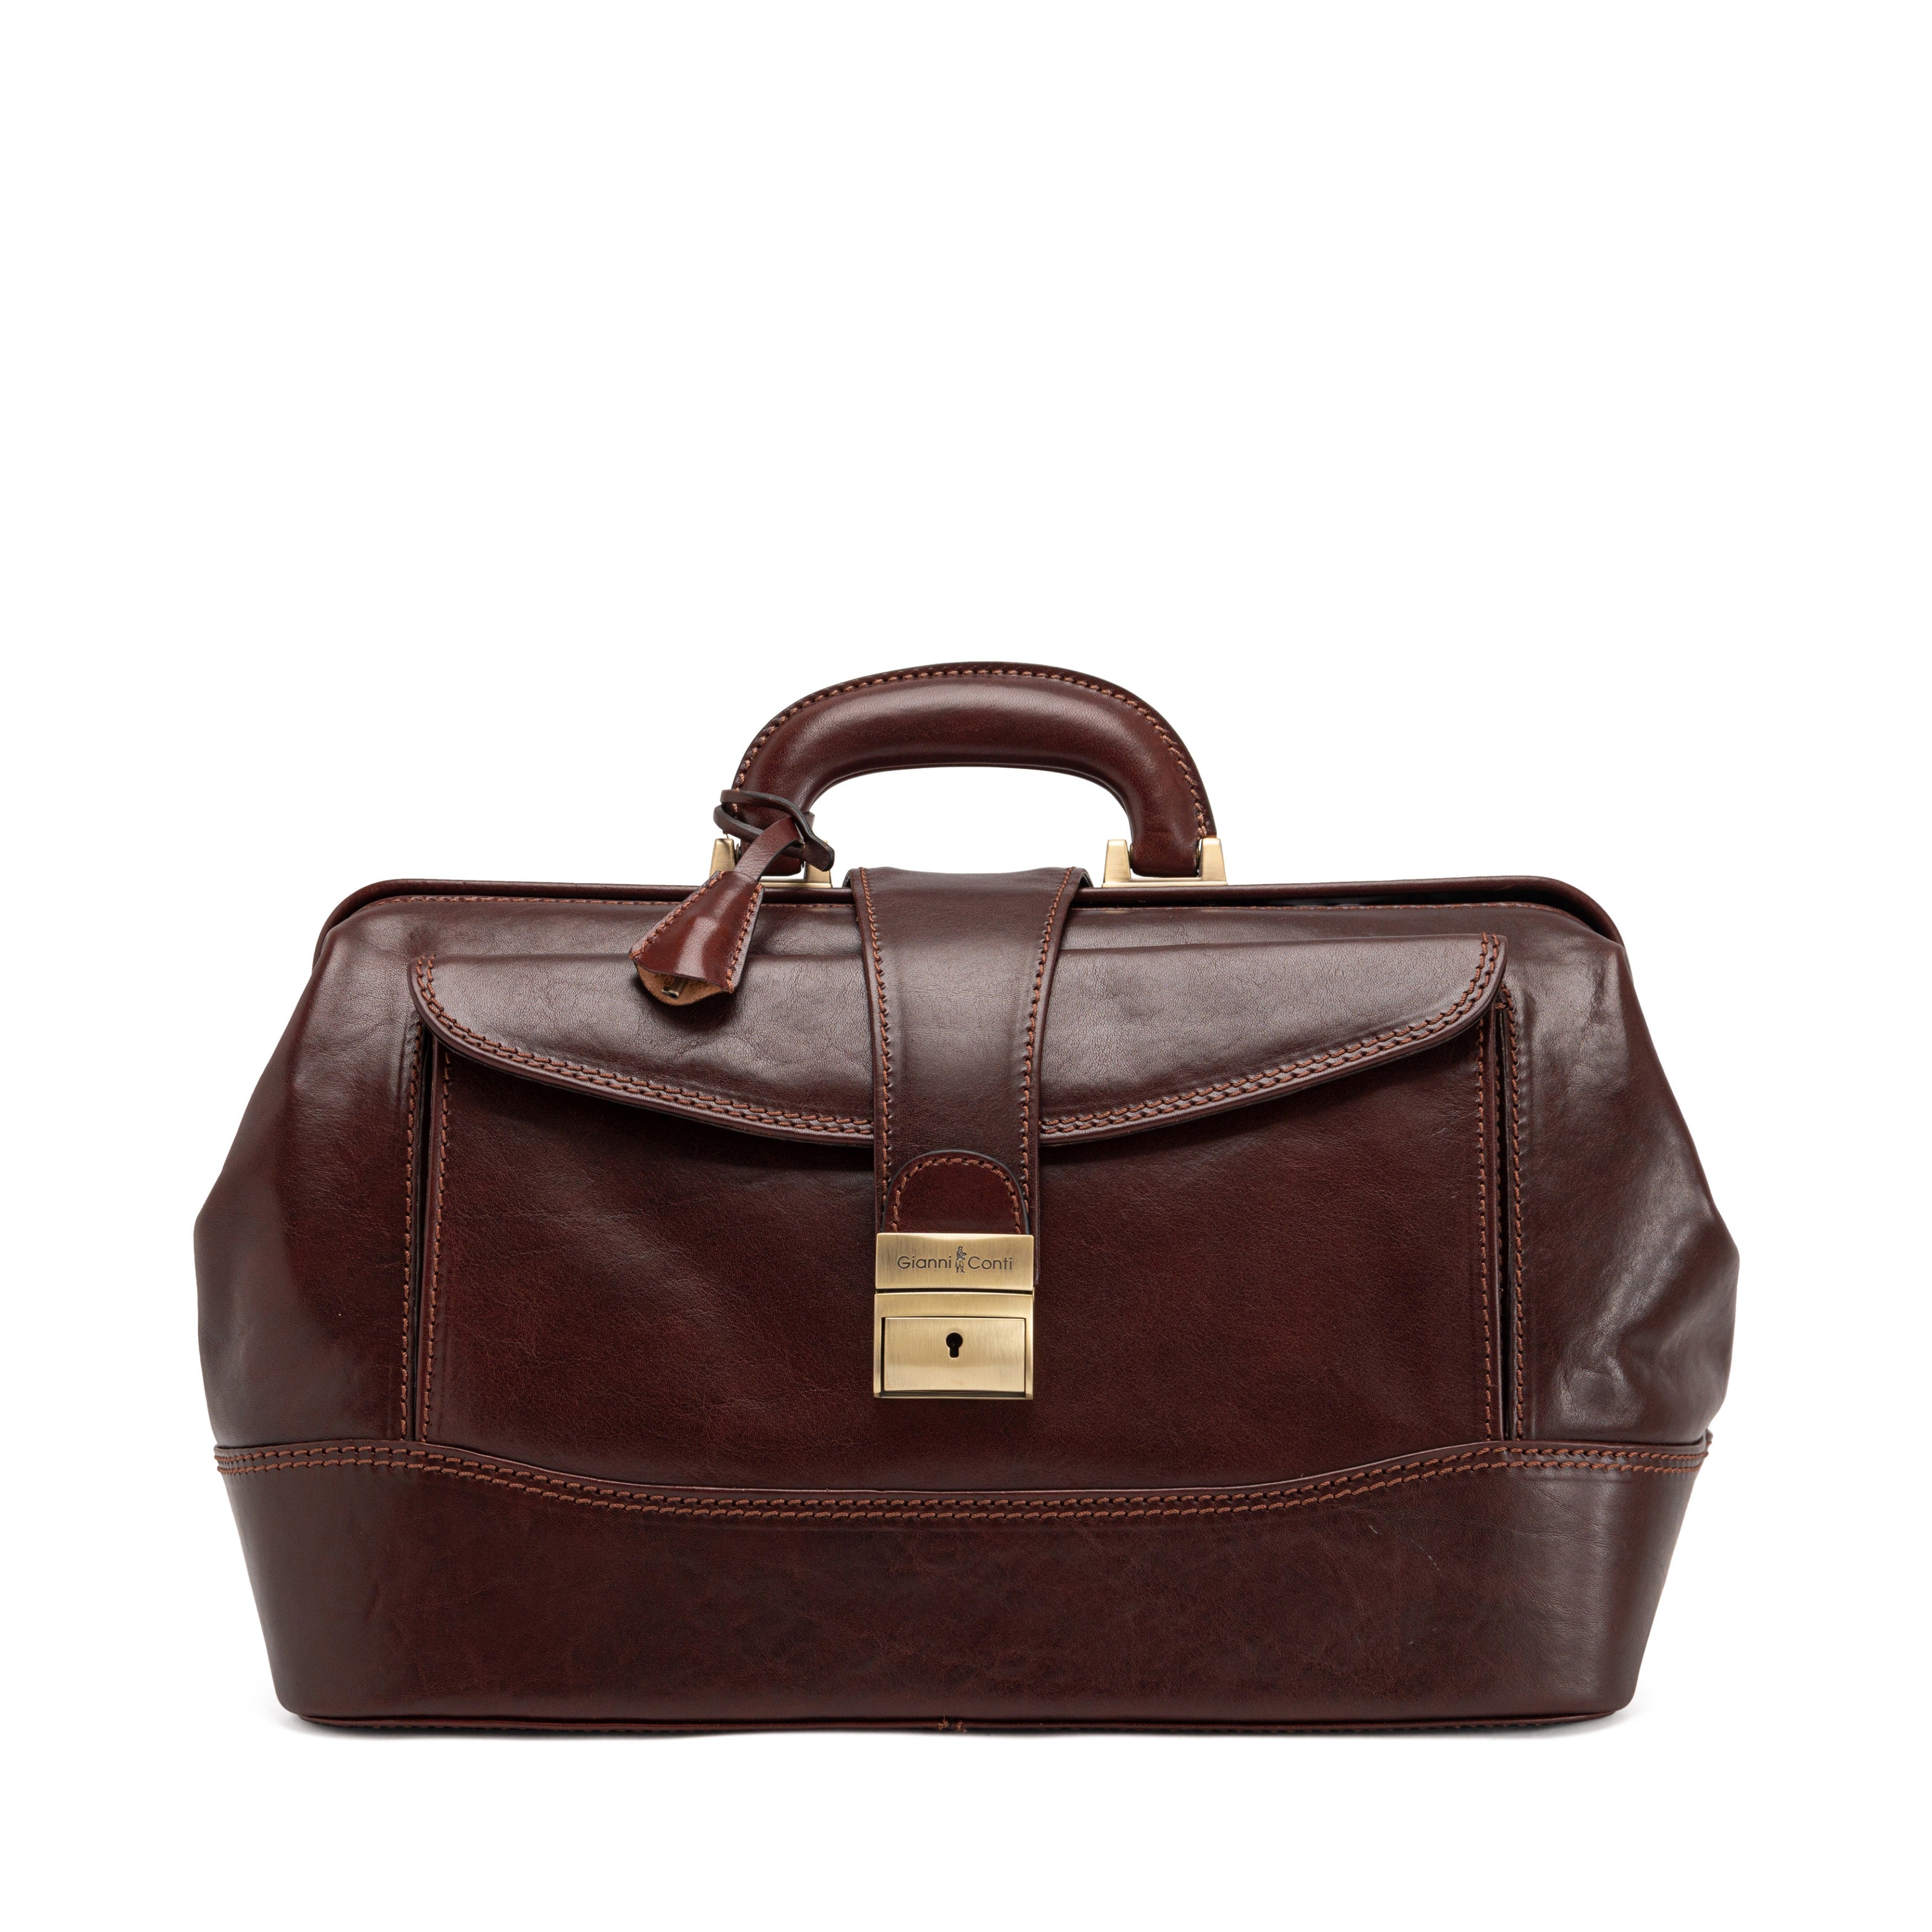 Gianni Conti LILA Doctor Bag - Vegetable-Tanned Leather, Made in Italy